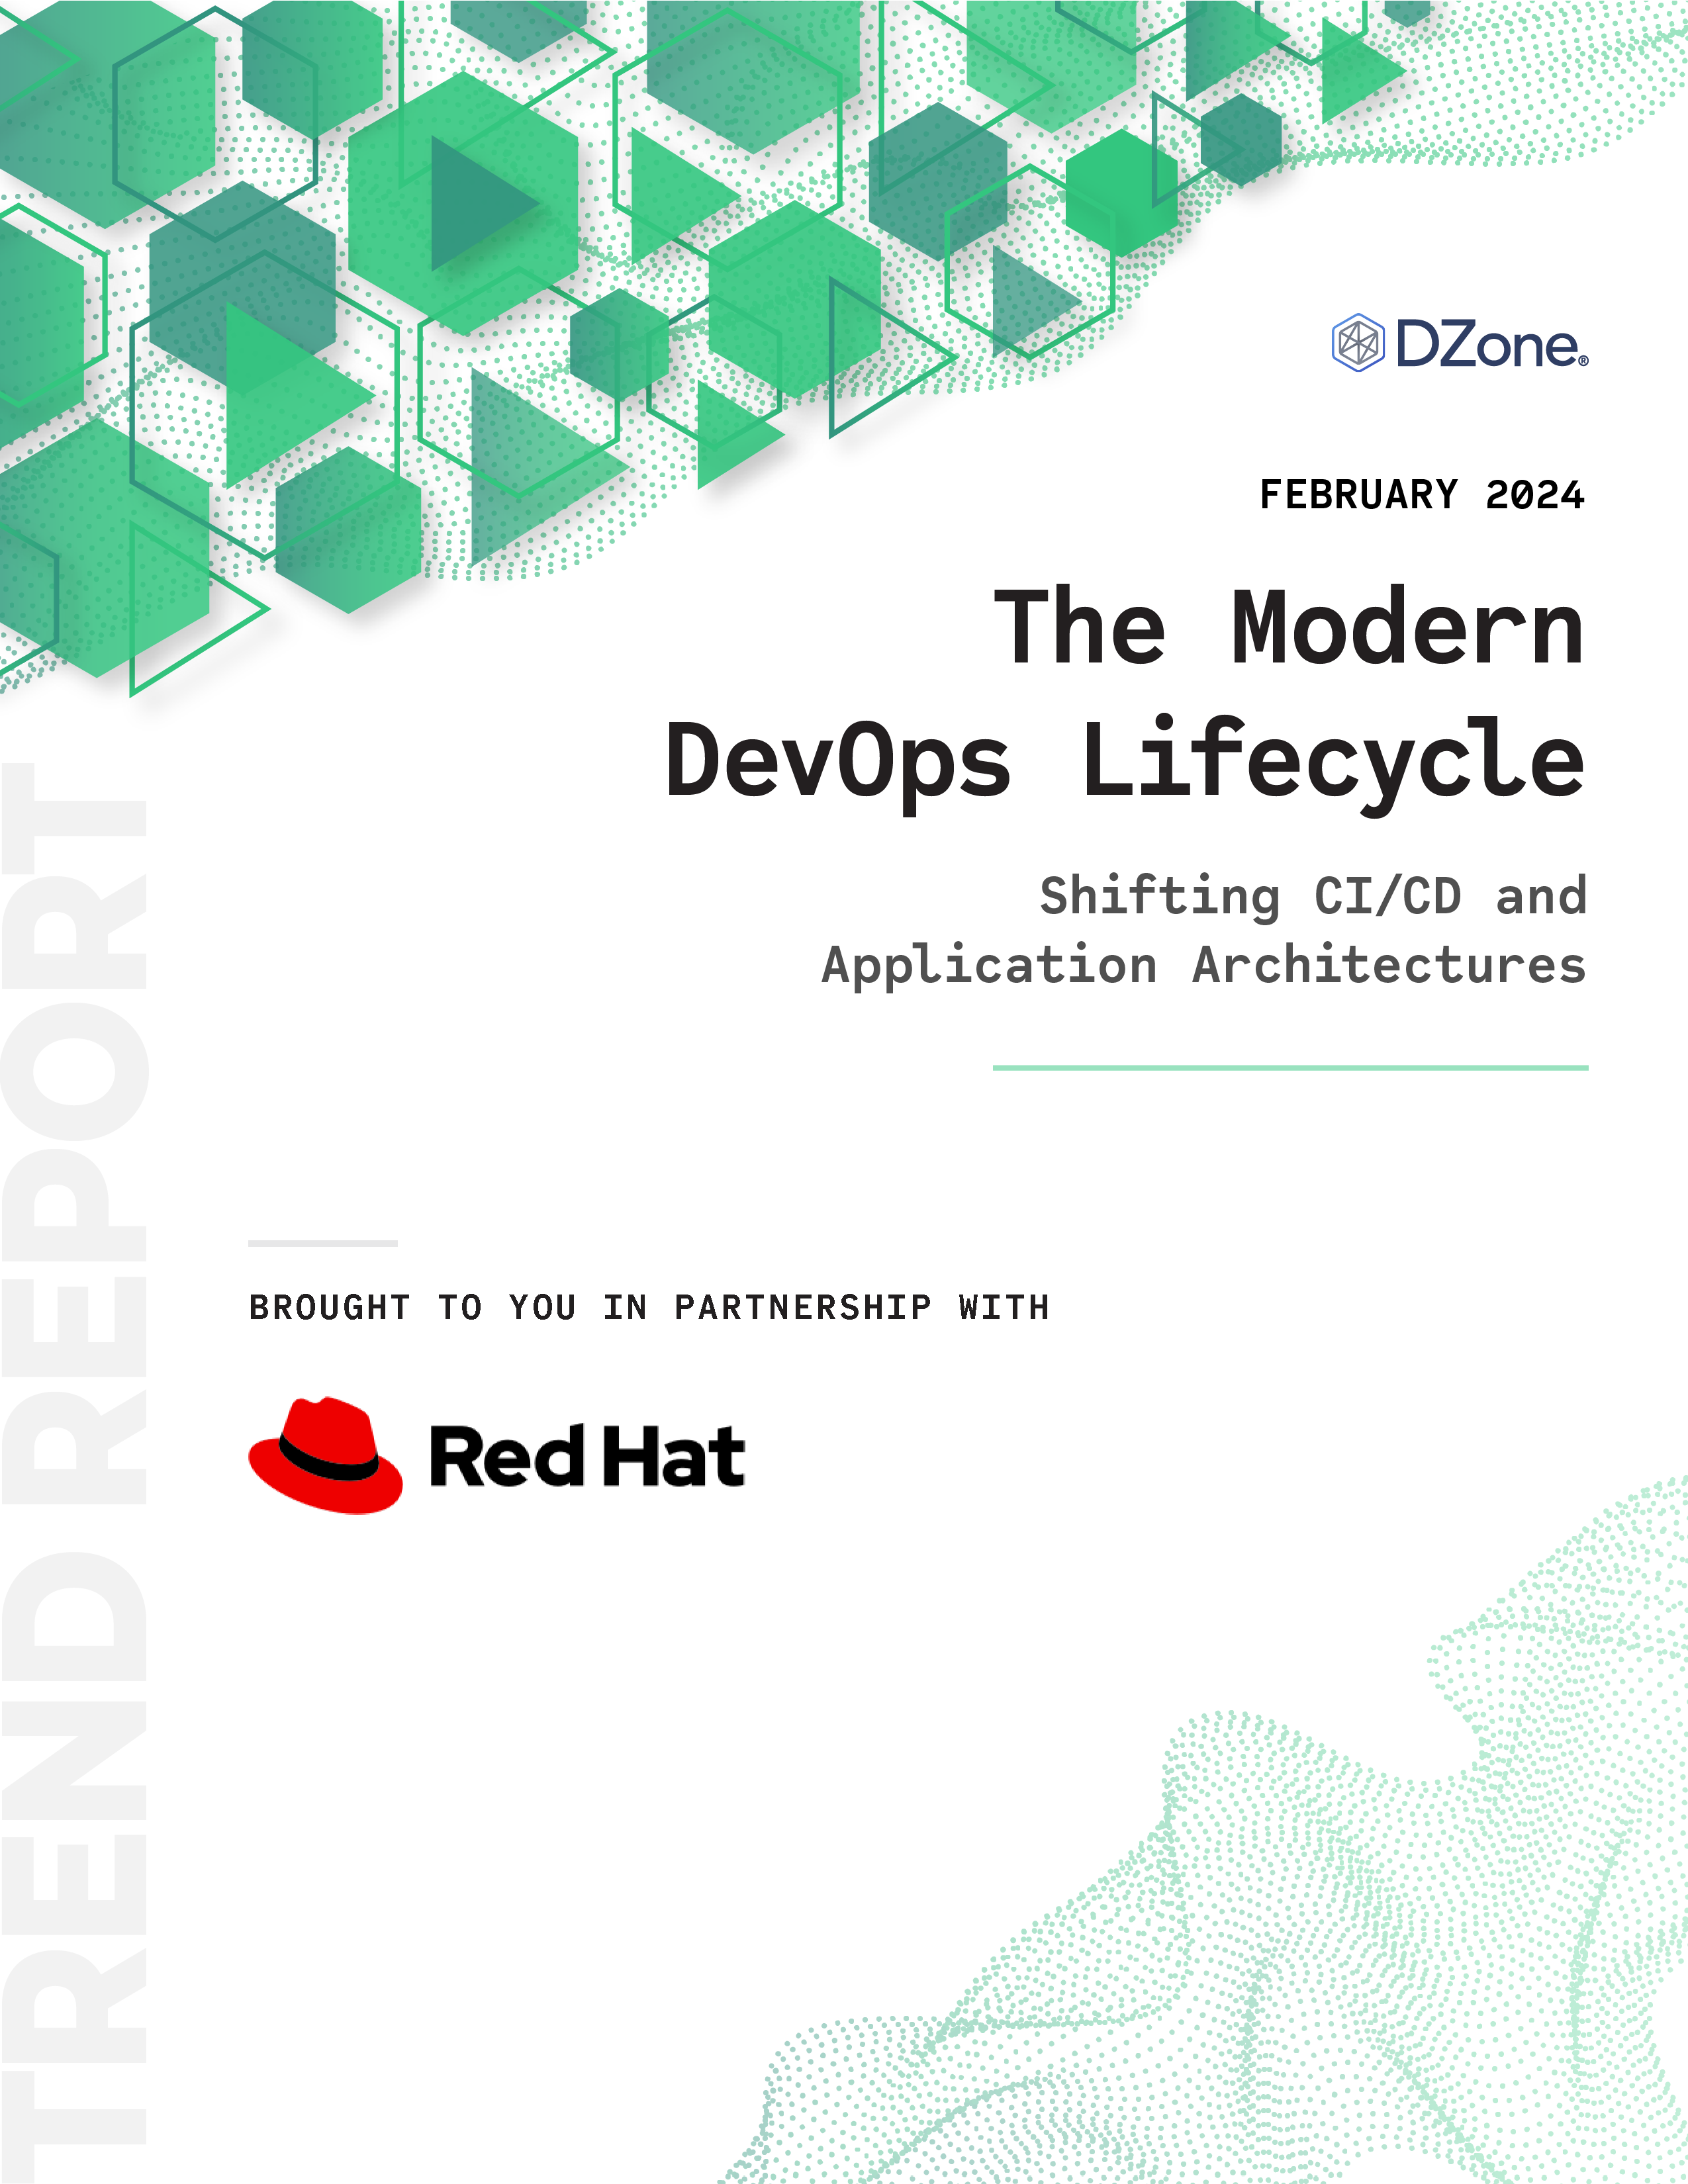 The Modern DevOps Lifecycle